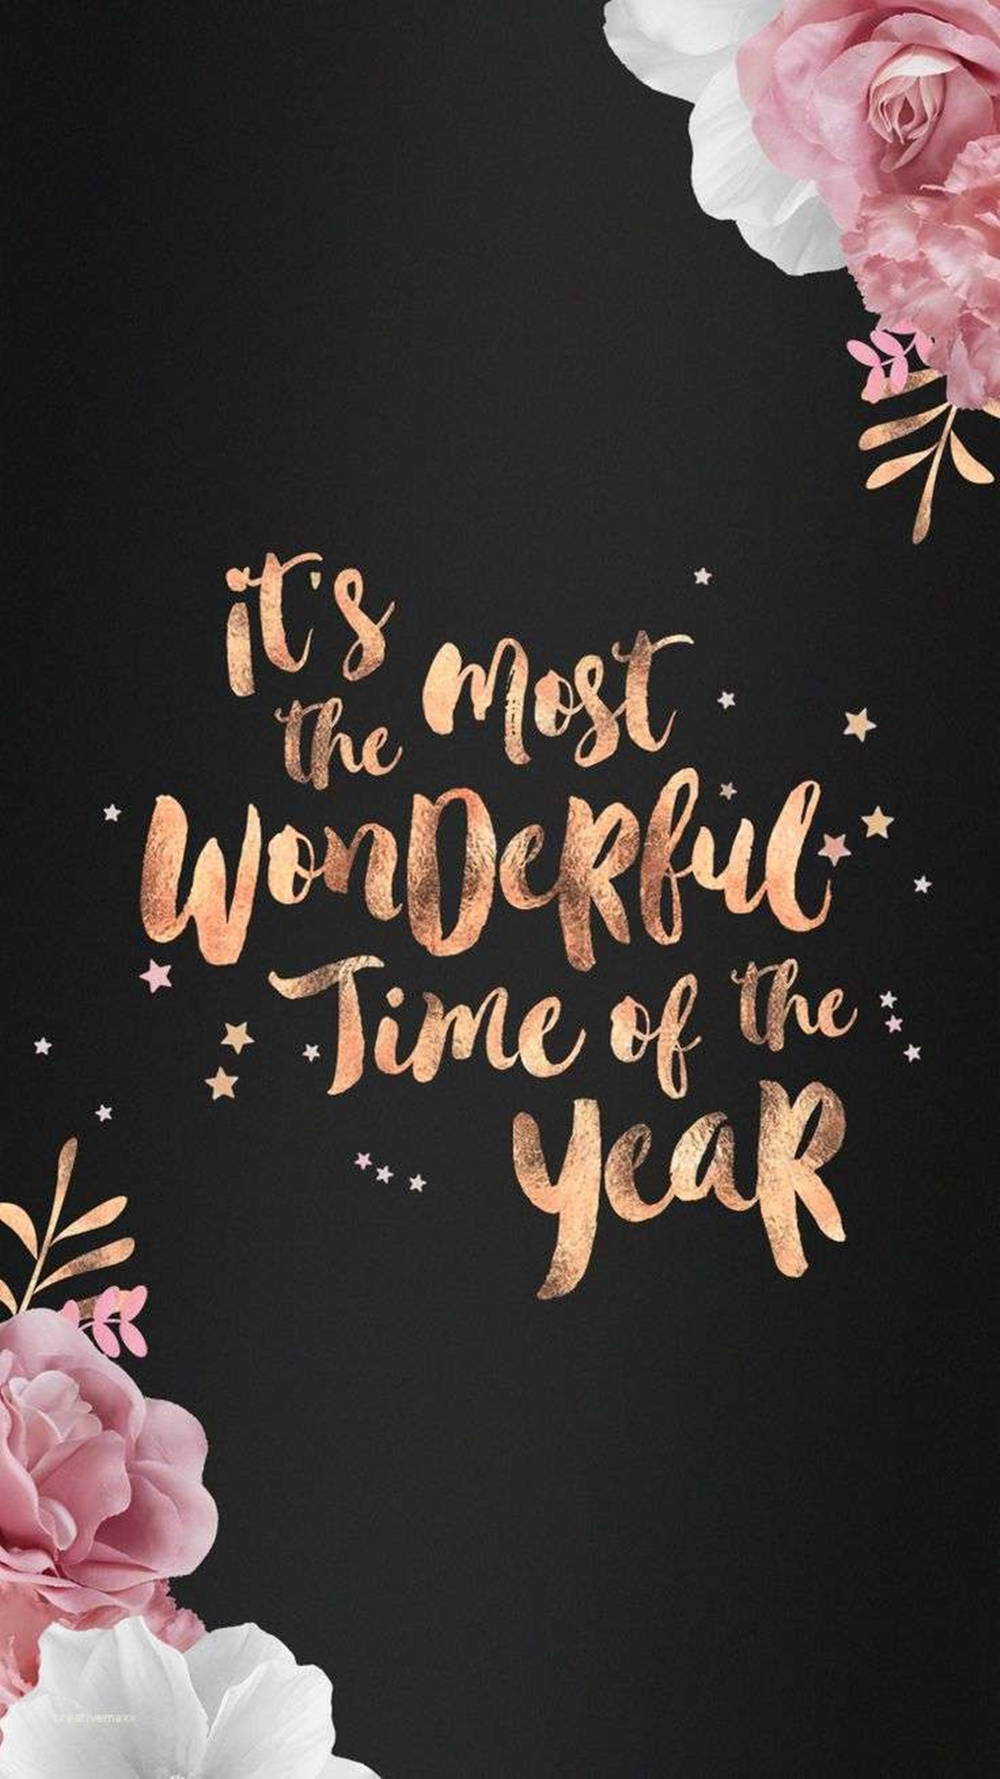 Trending Aesthetic Wonderful Time Of The Year Wallpaper